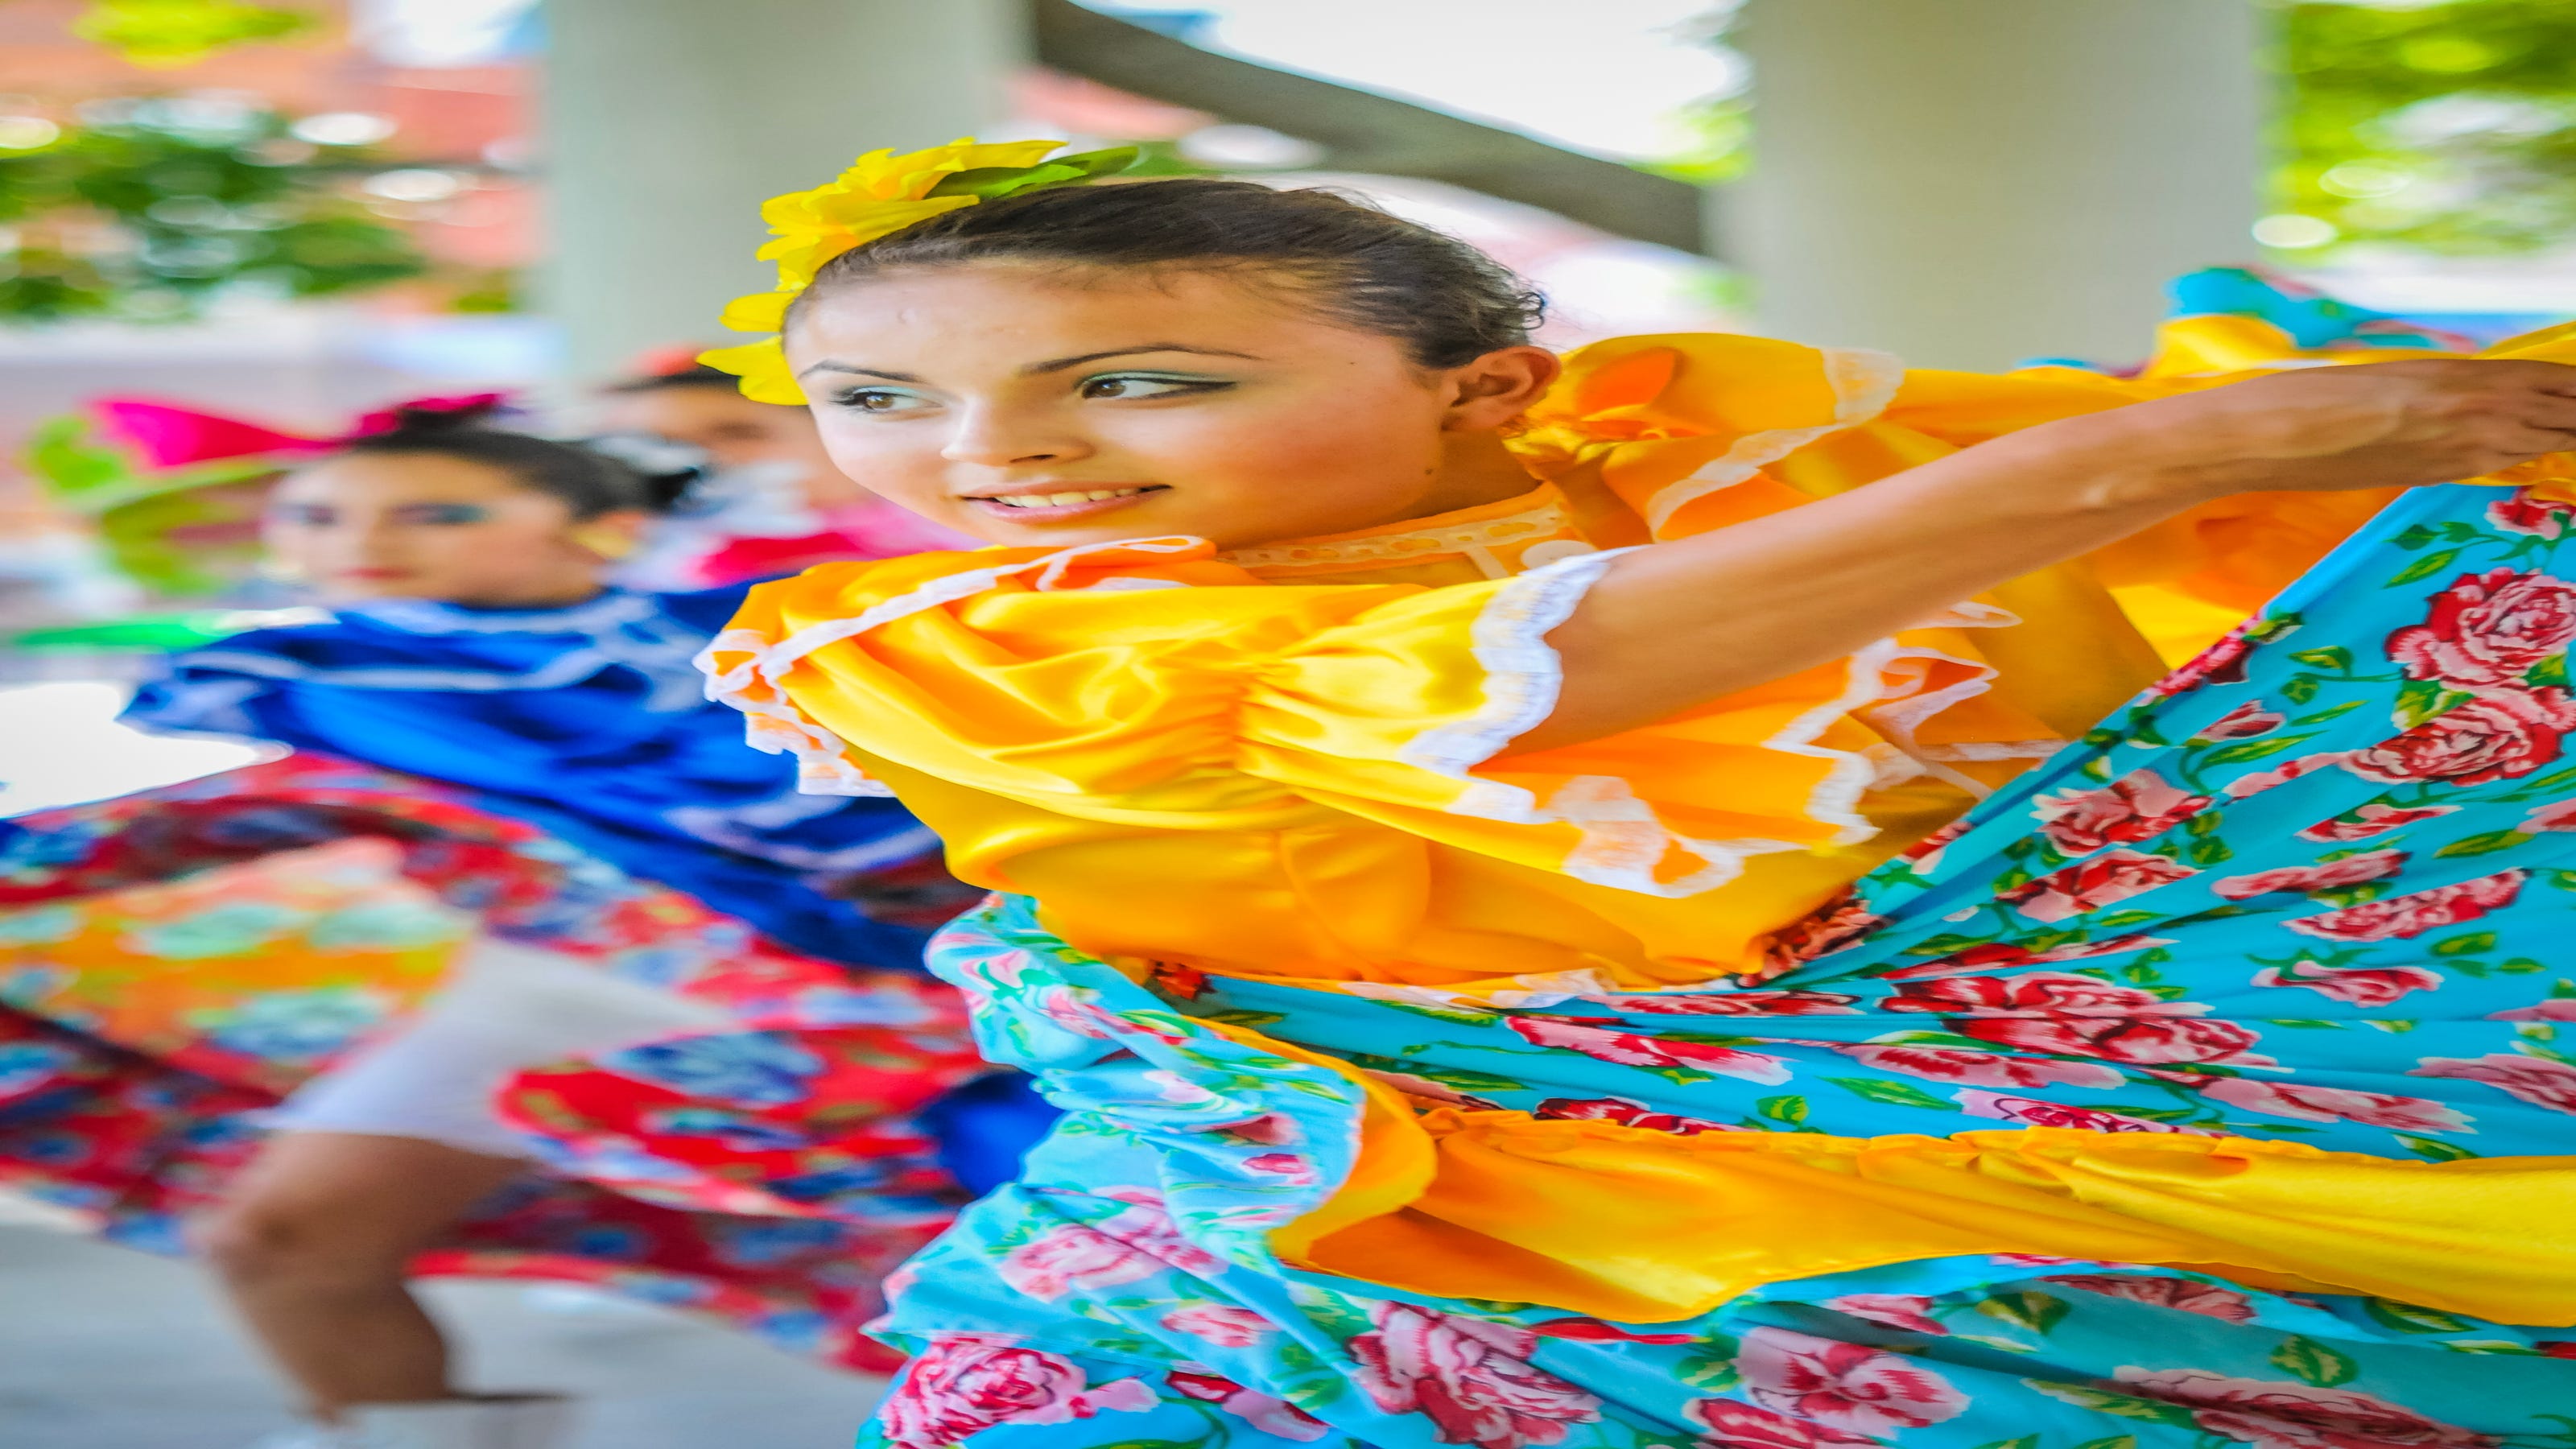 The Latino Heritage Festival At Western Gateway Park In Des Moines